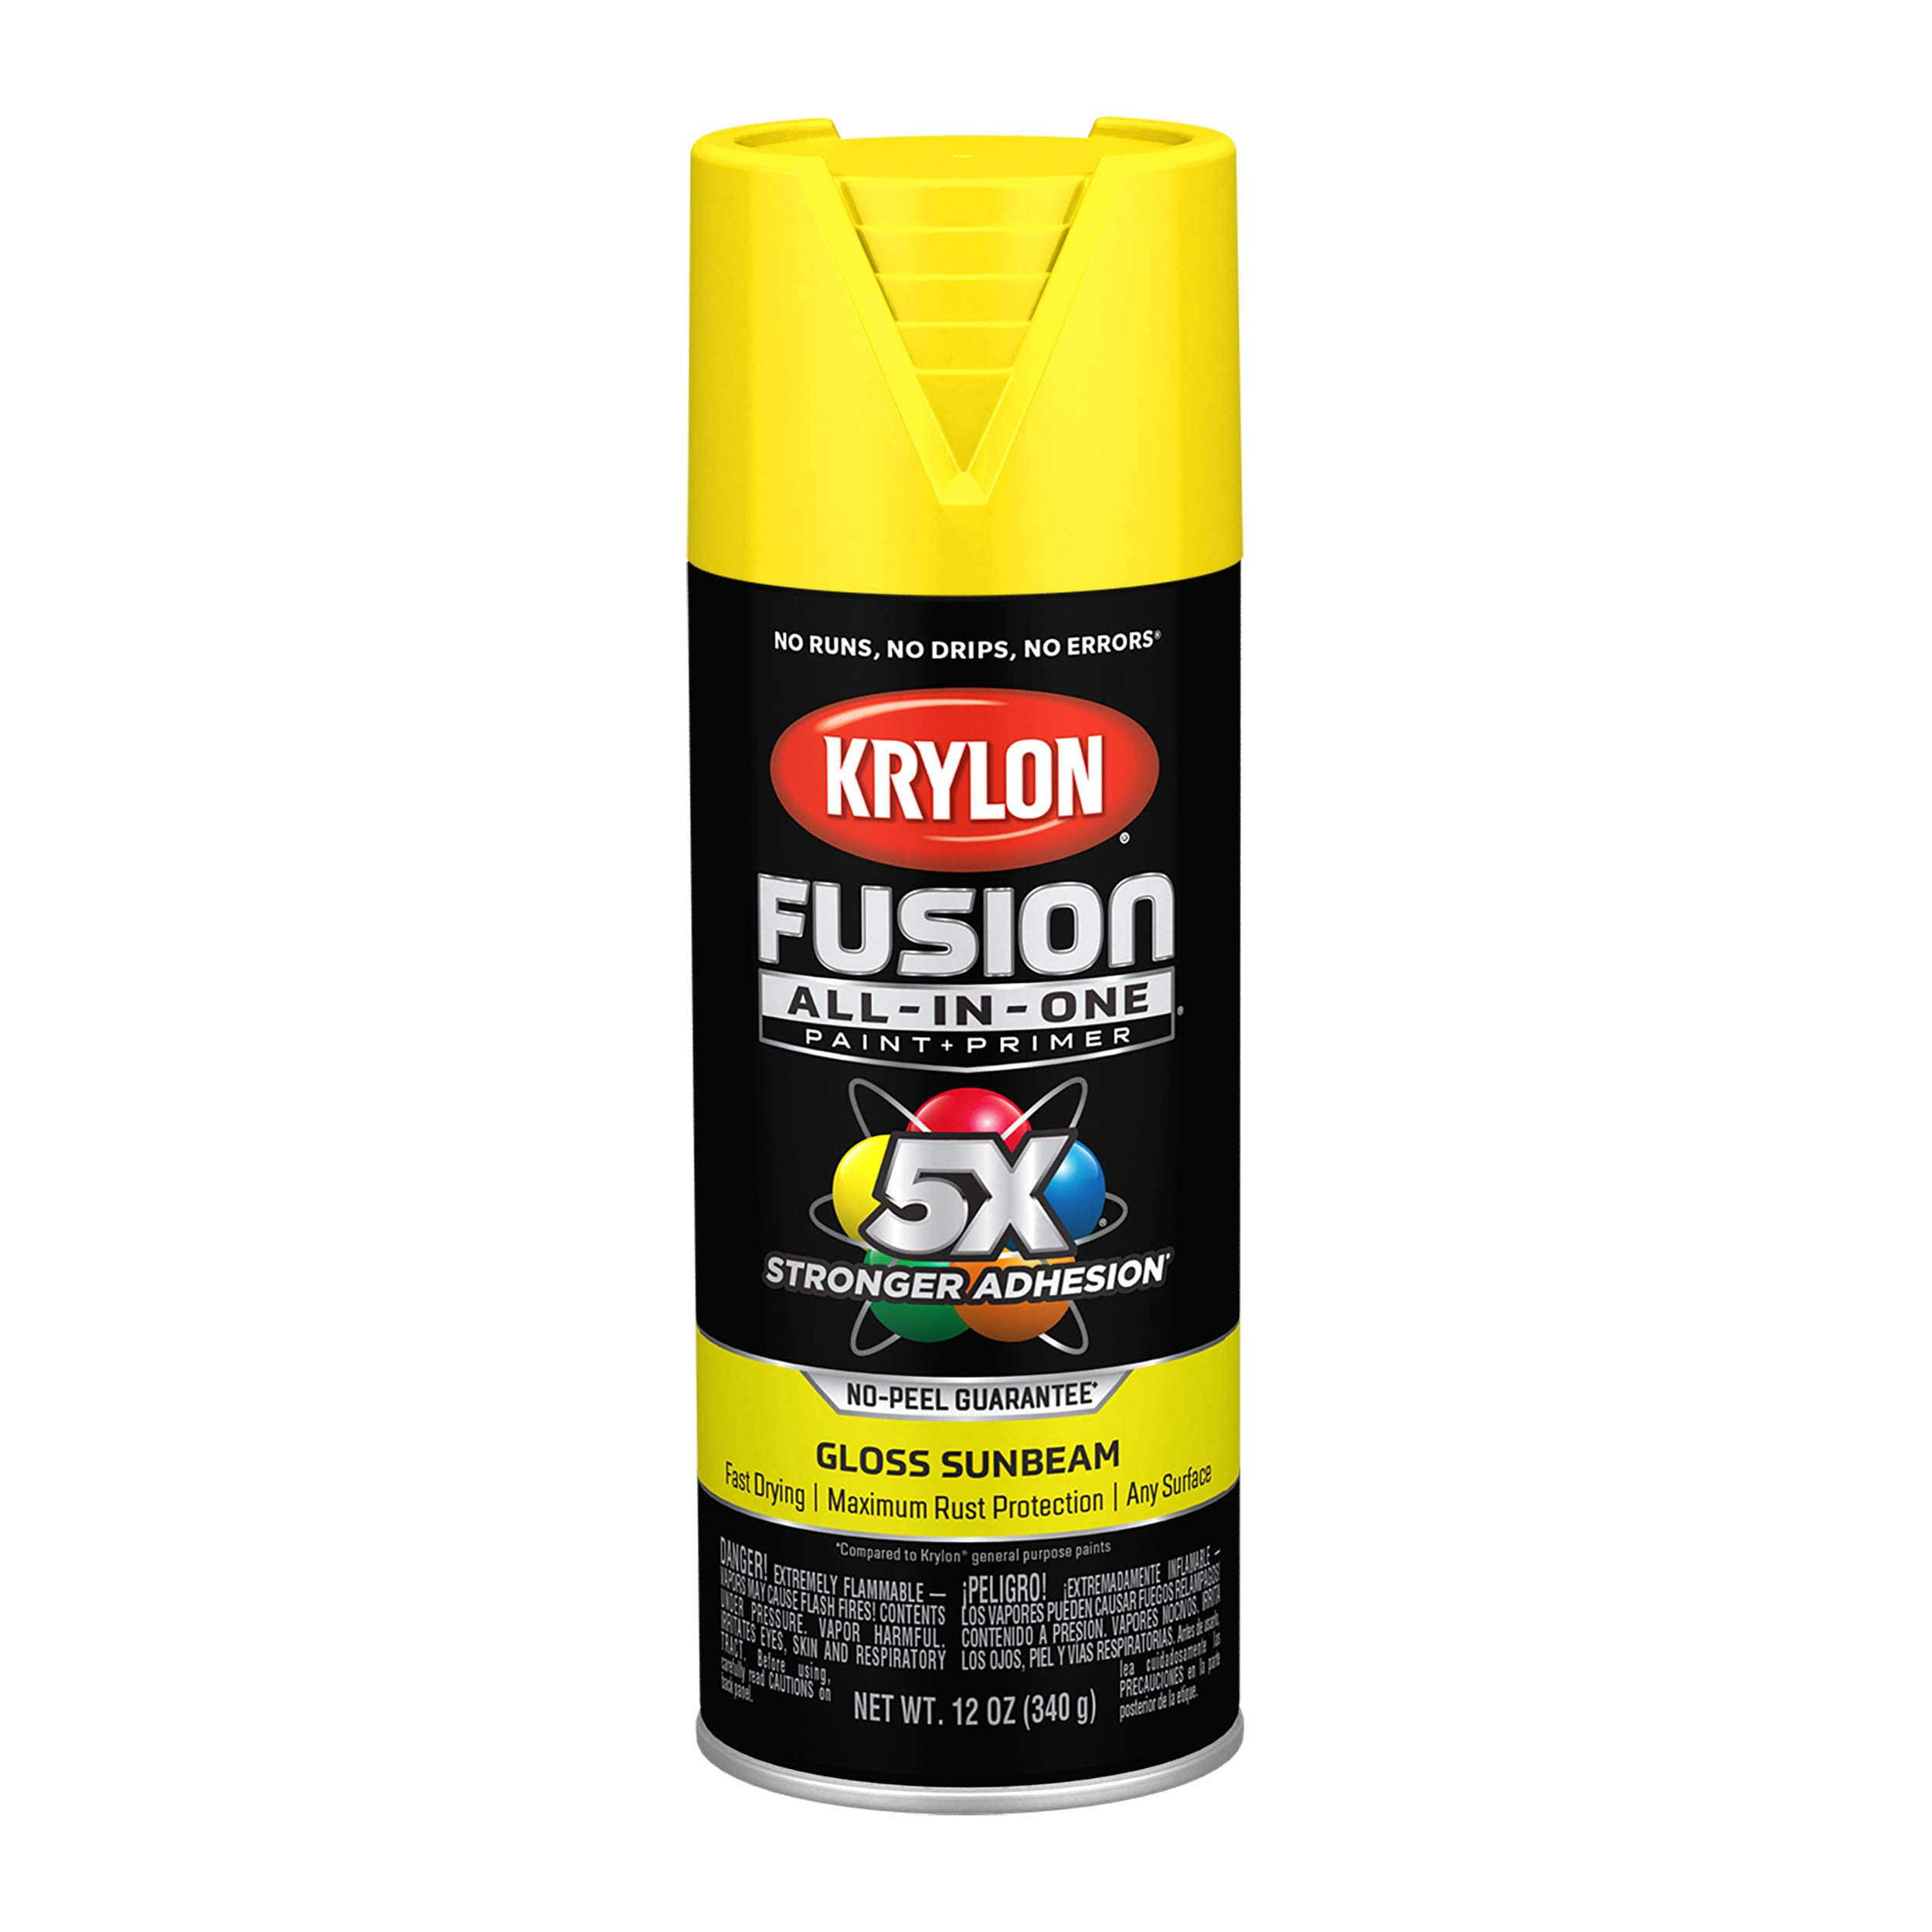 Krylon K02725007 Fusion All-In-One Spray Paint for Indoor/Outdoor Use, Gloss Sunbeam Yellow